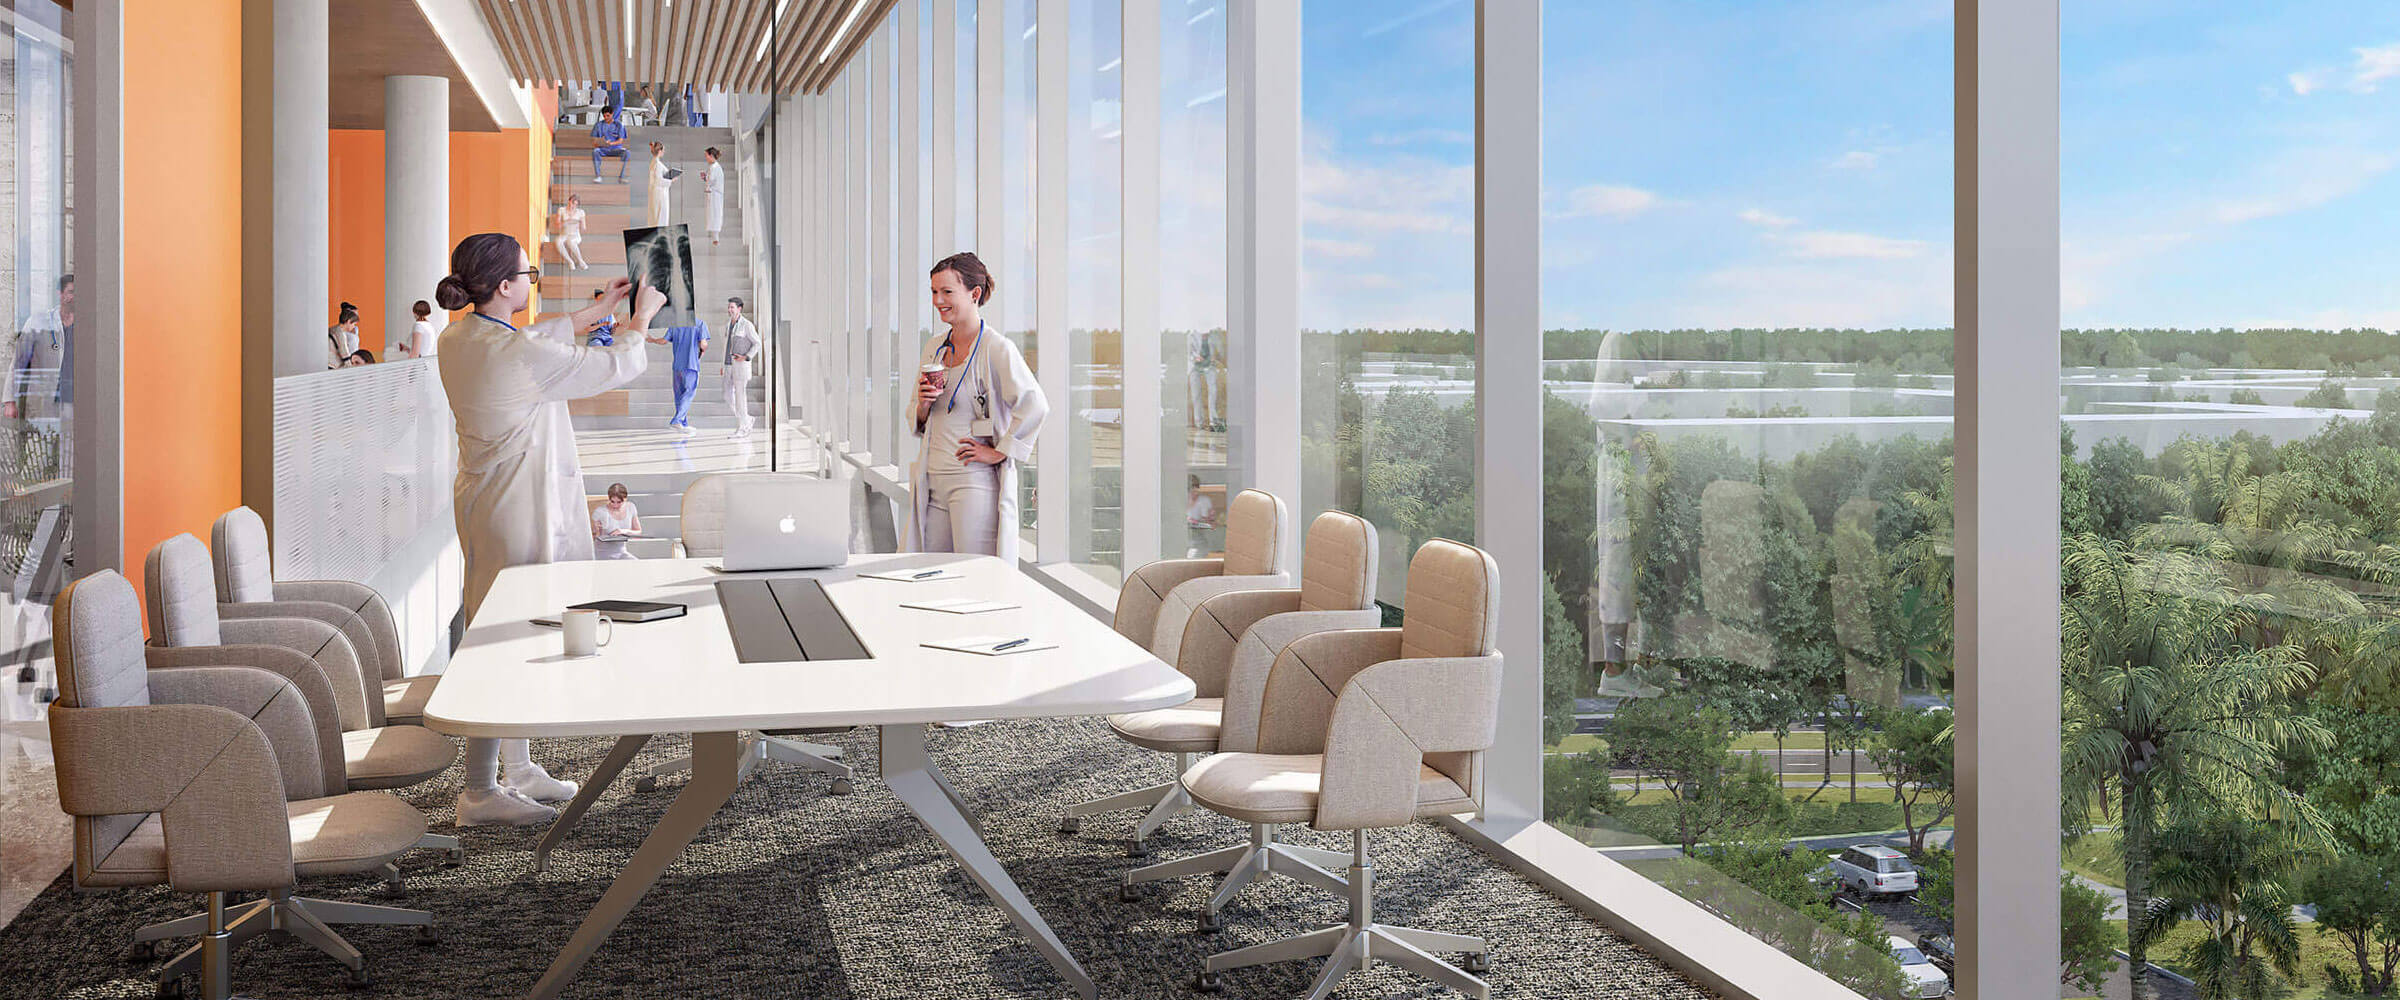 Conference Room Architectural Rendering of UHealth at SoLé Mia in Aventura